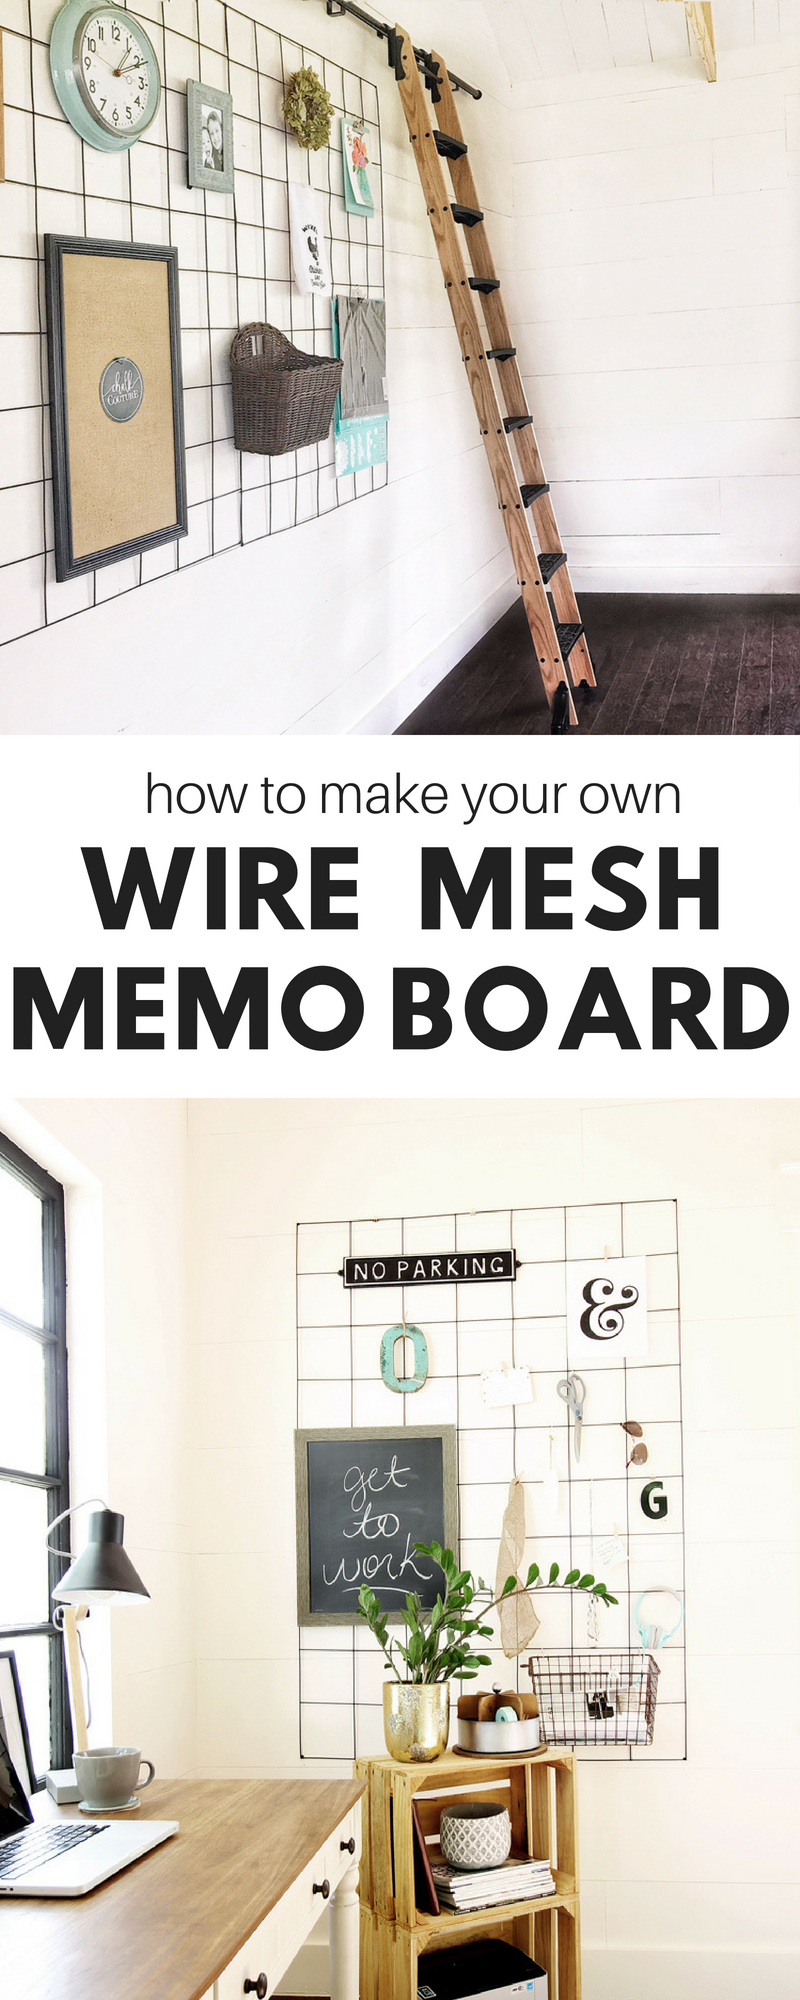 How to Make a Wire Mesh Memo board for under $20. Such an easy way to organize stuff on the cheap!